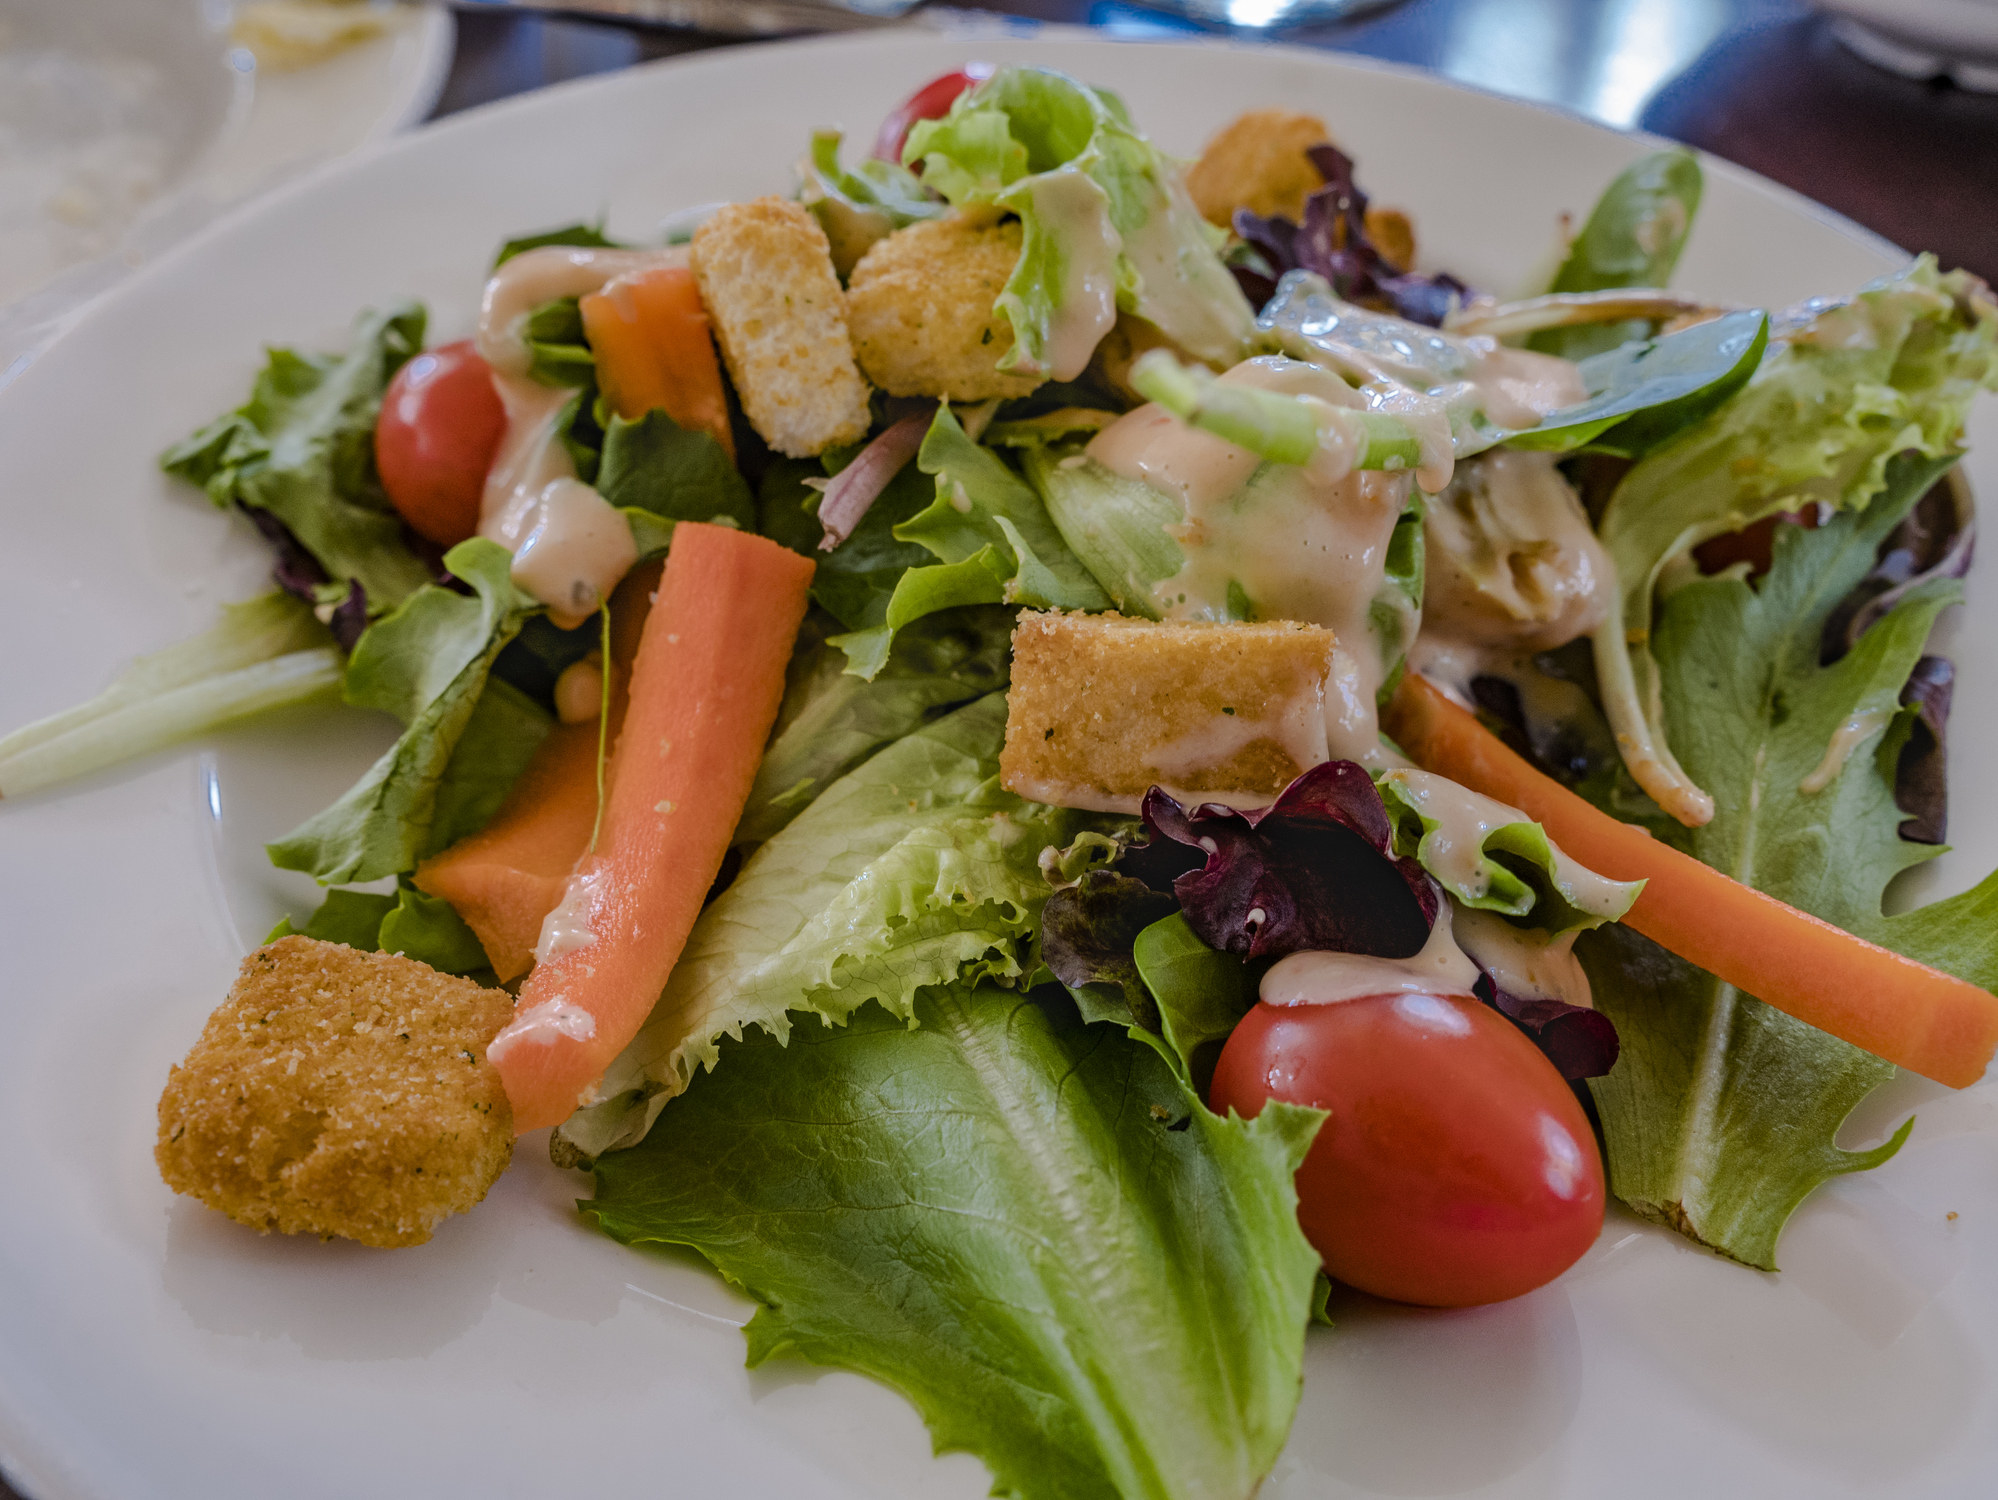 A salad with dressing